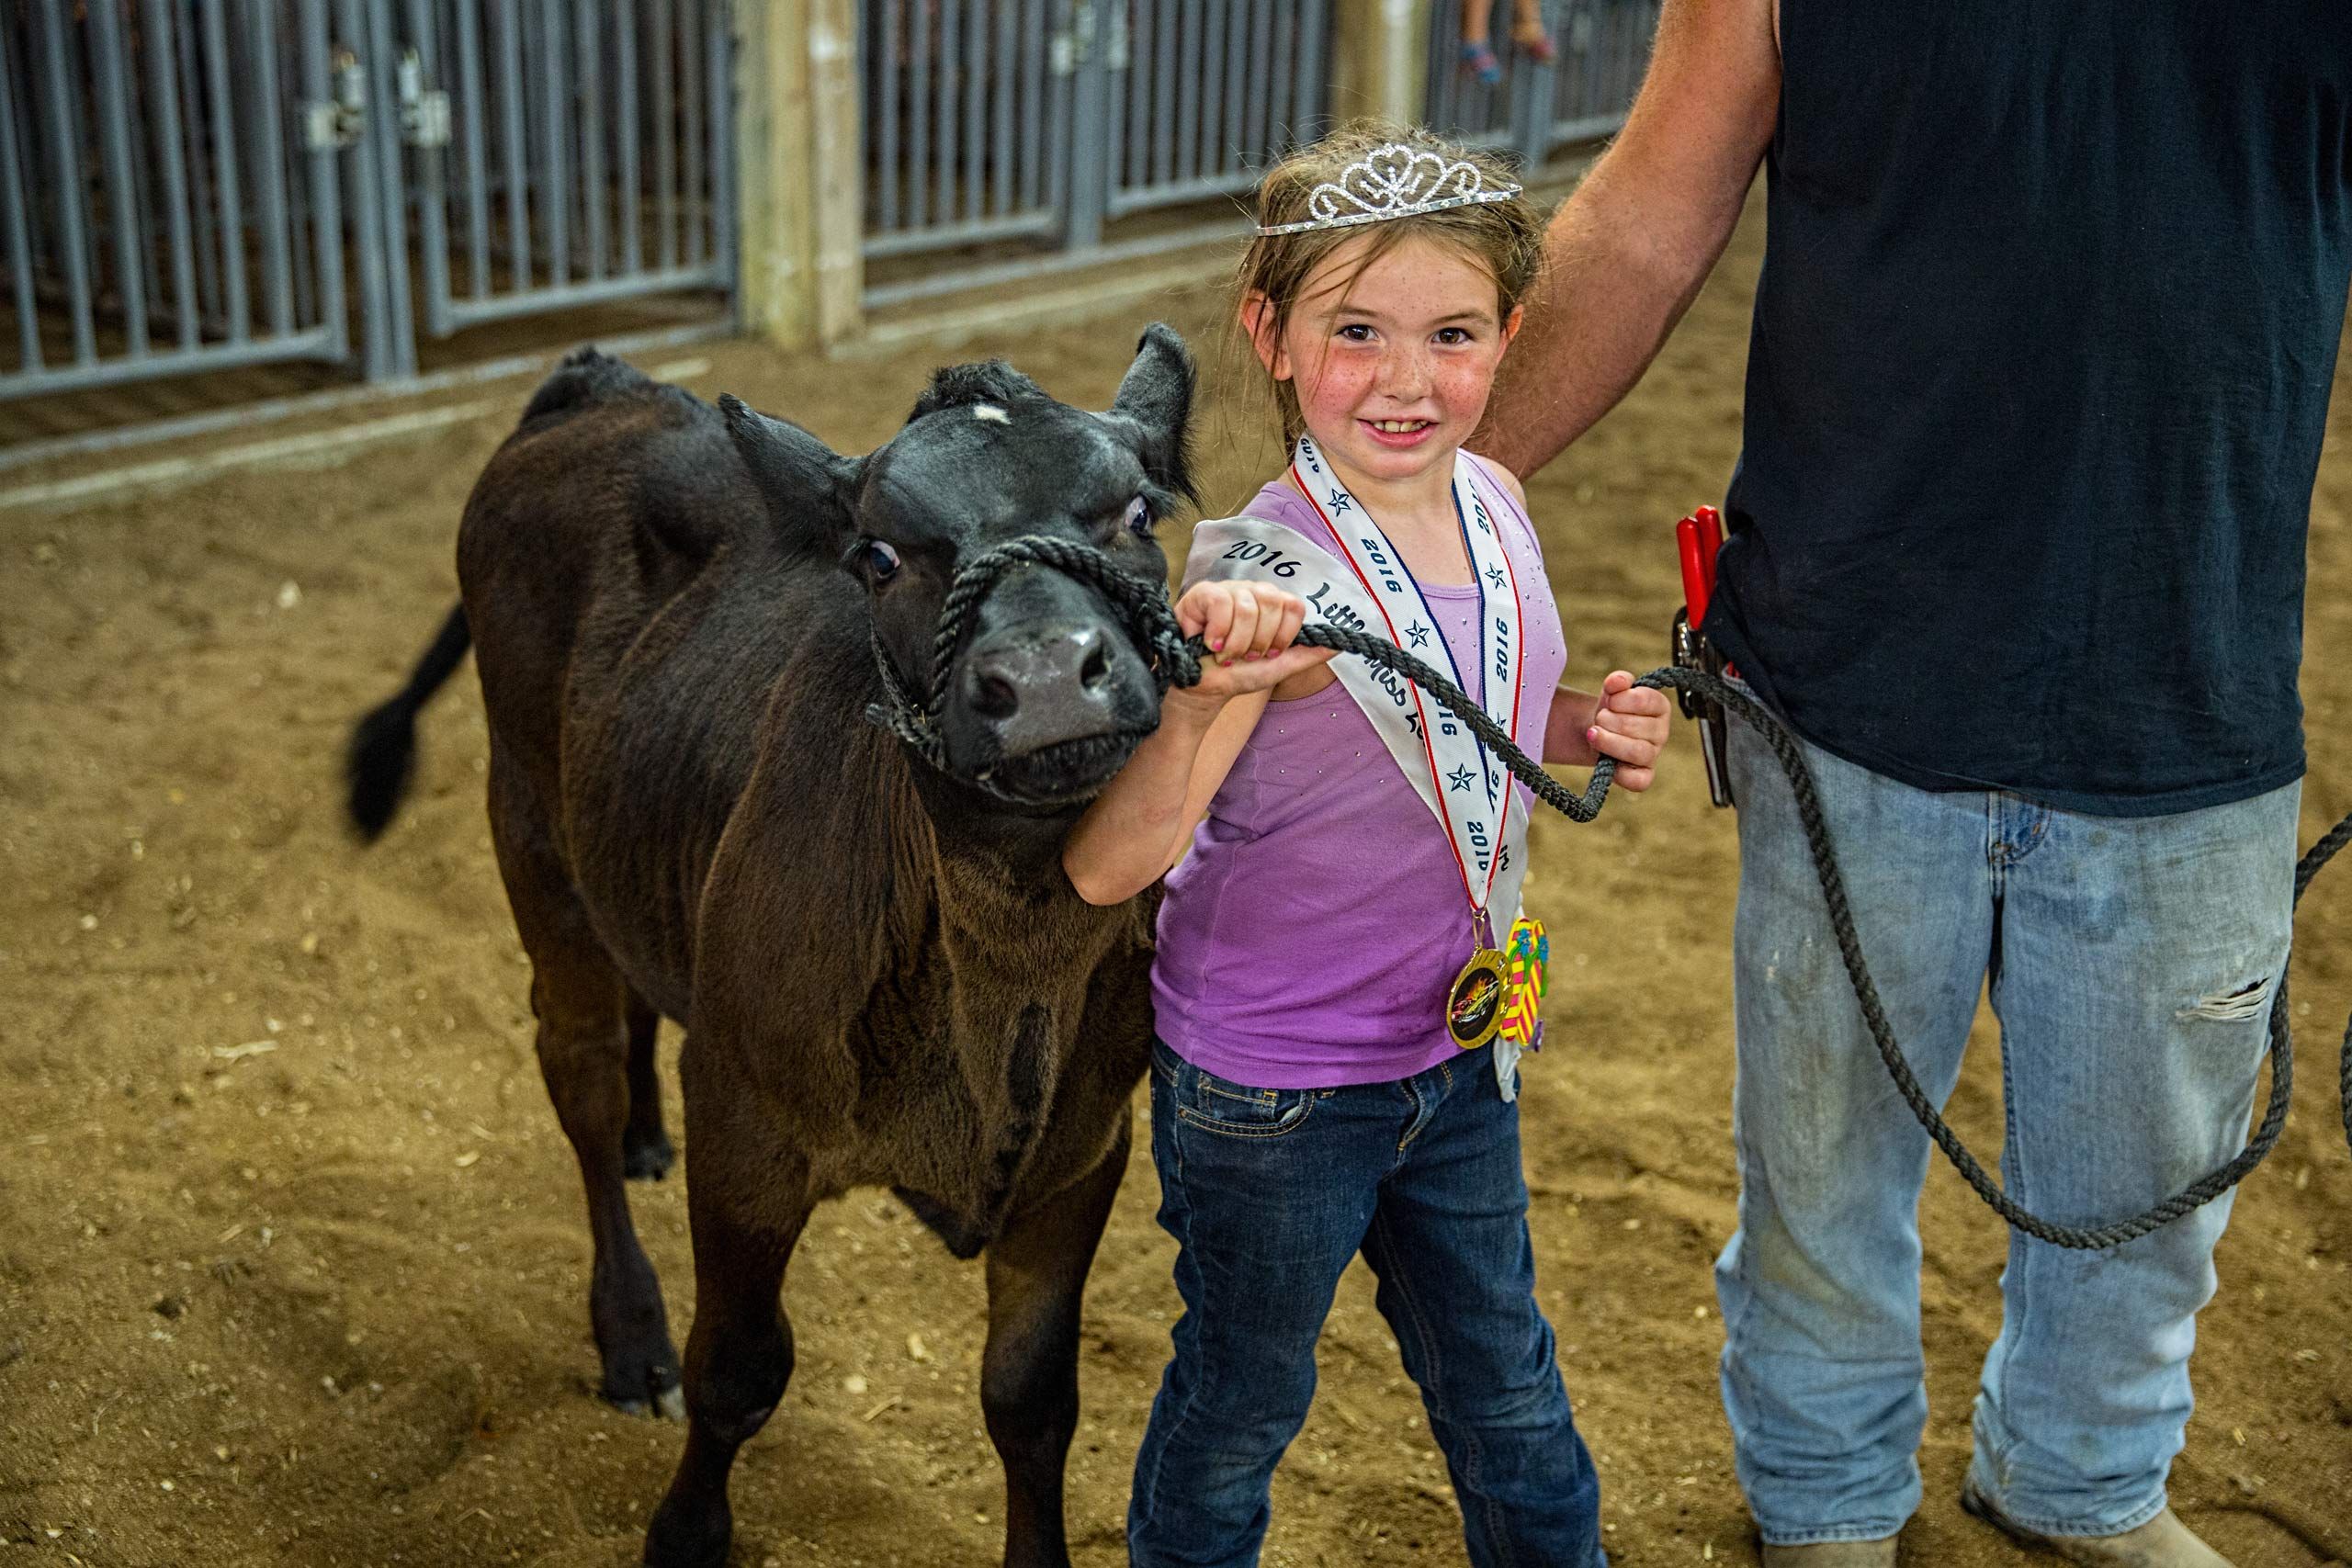 A young Girl Exhibiting Her Cow